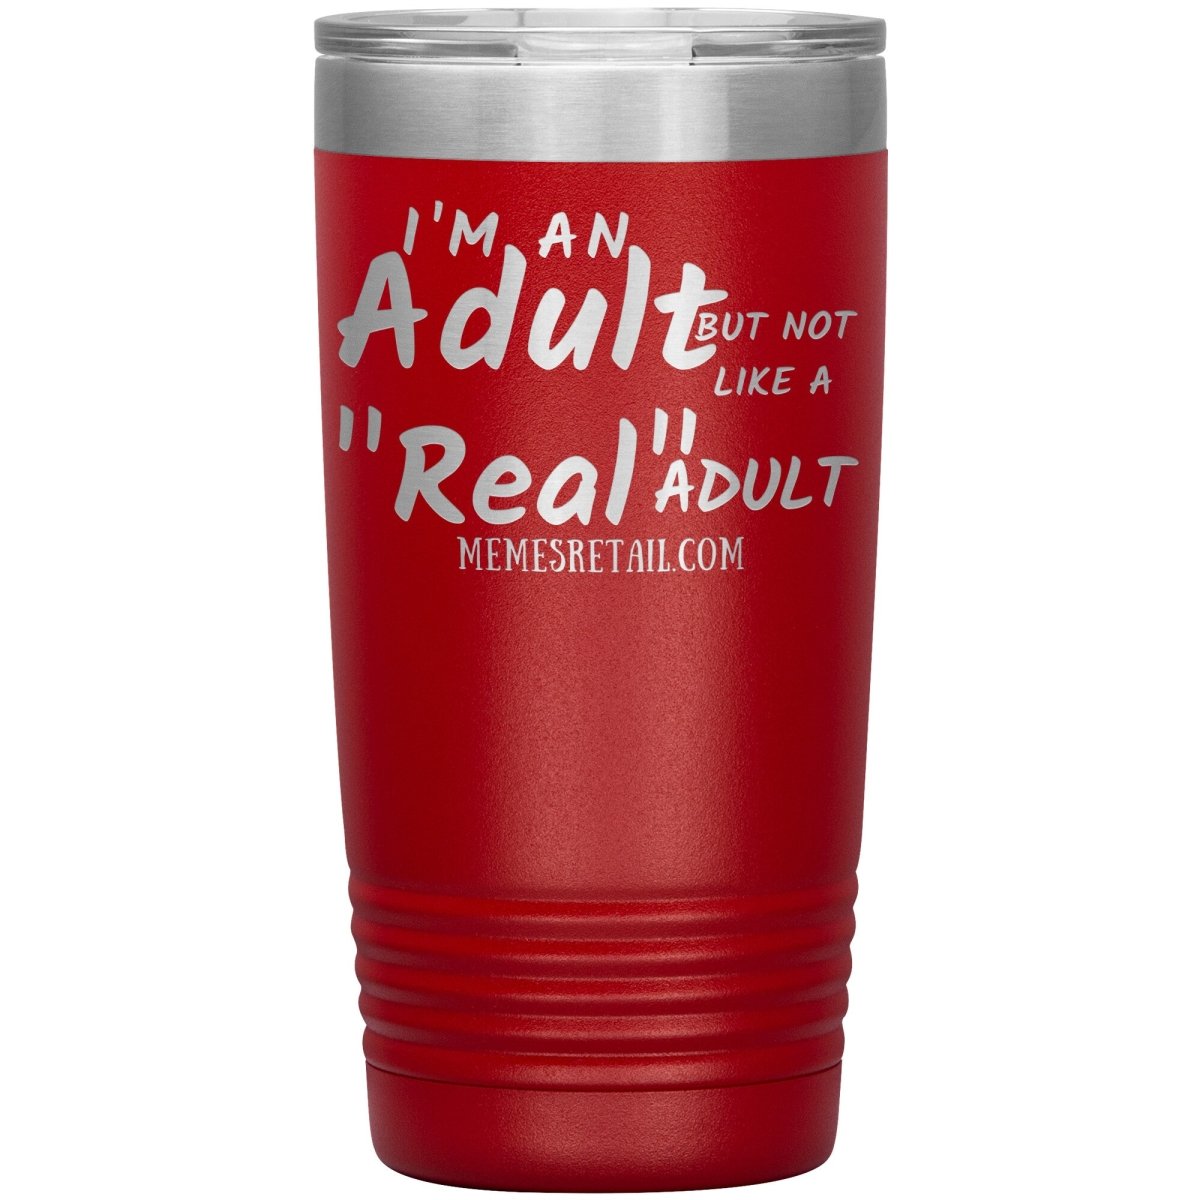 I'm an adult, but not like a "real" adult Tumblers, 20oz Insulated Tumbler / Red - MemesRetail.com